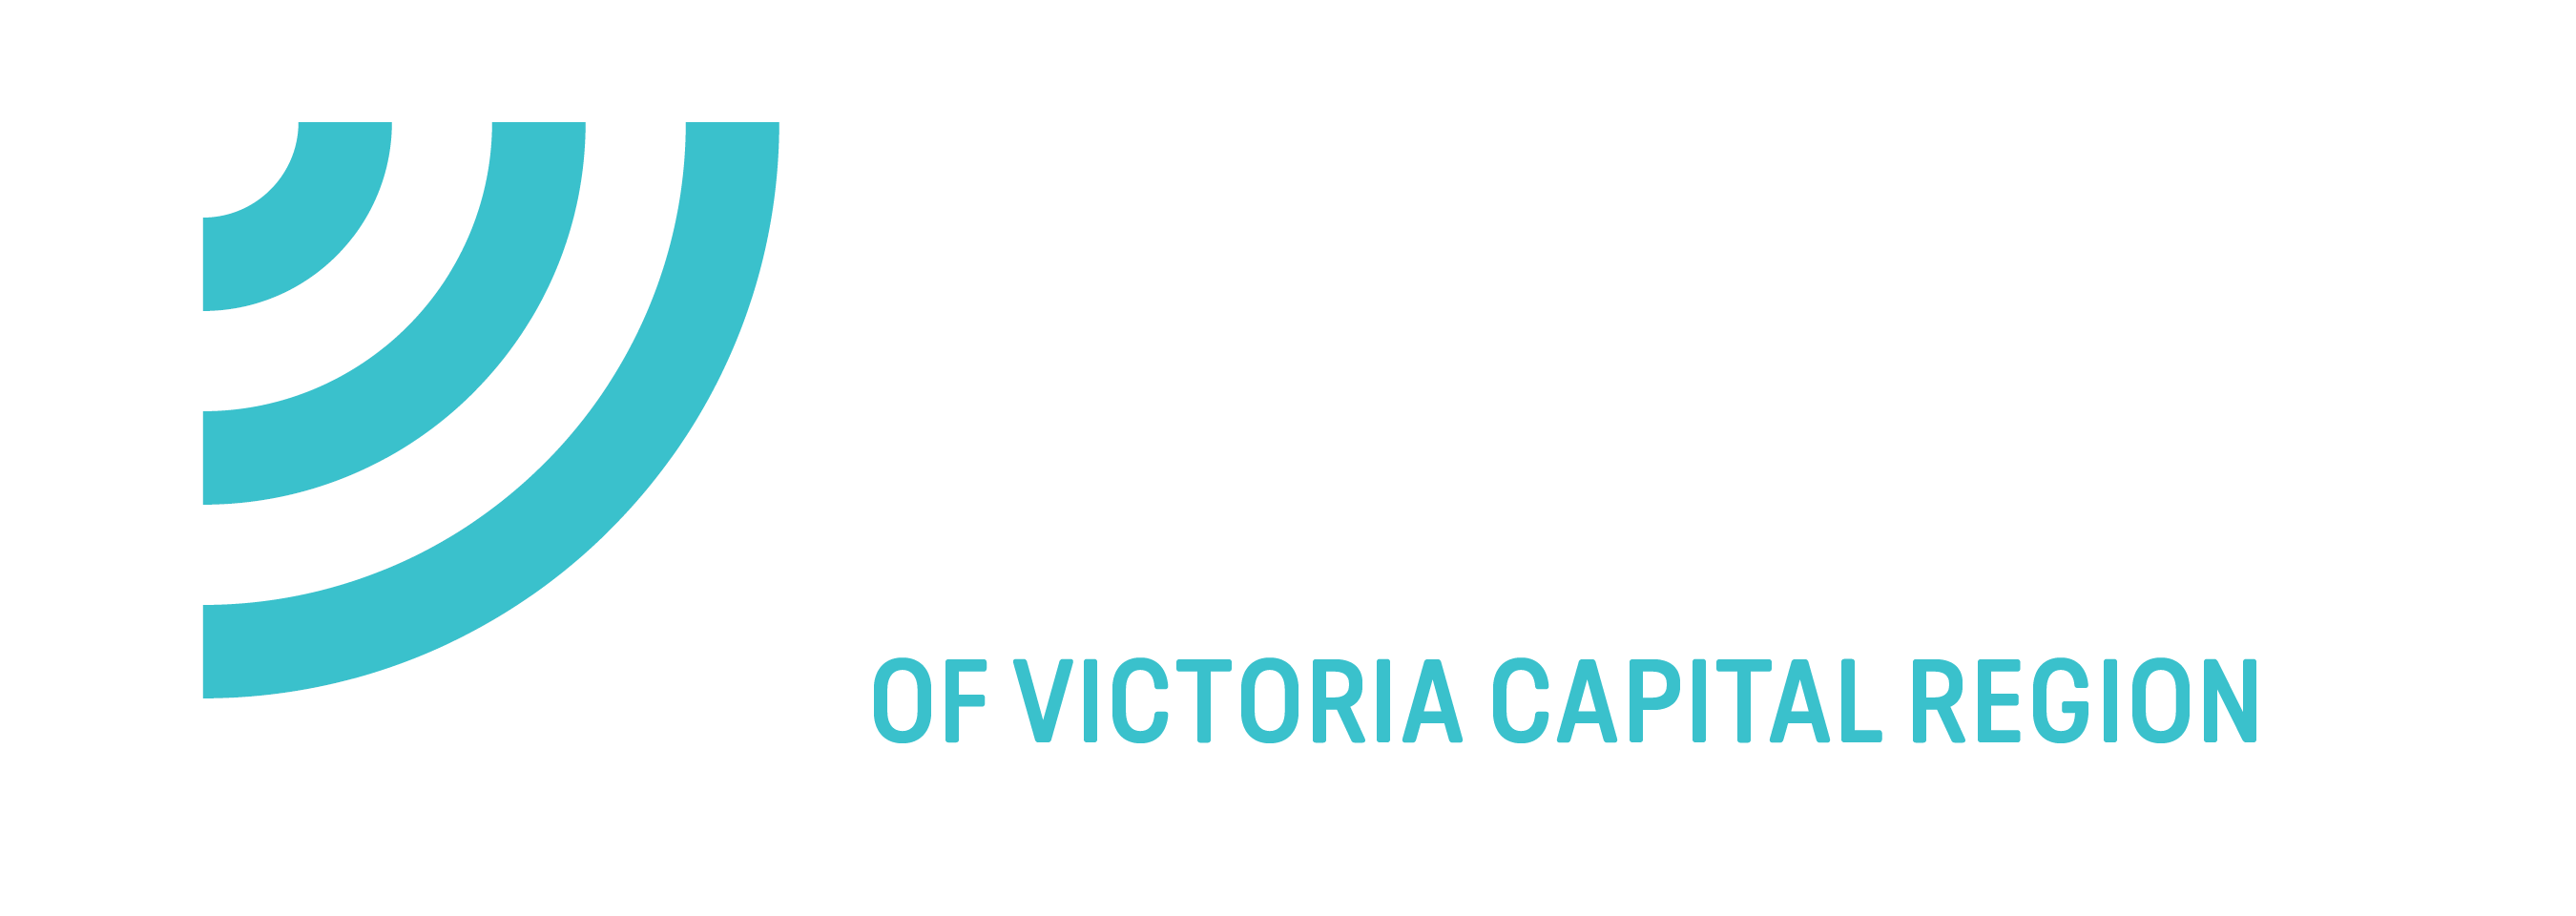 What We Do: Mentoring - Big Brothers Big Sisters of Victoria Capital Region